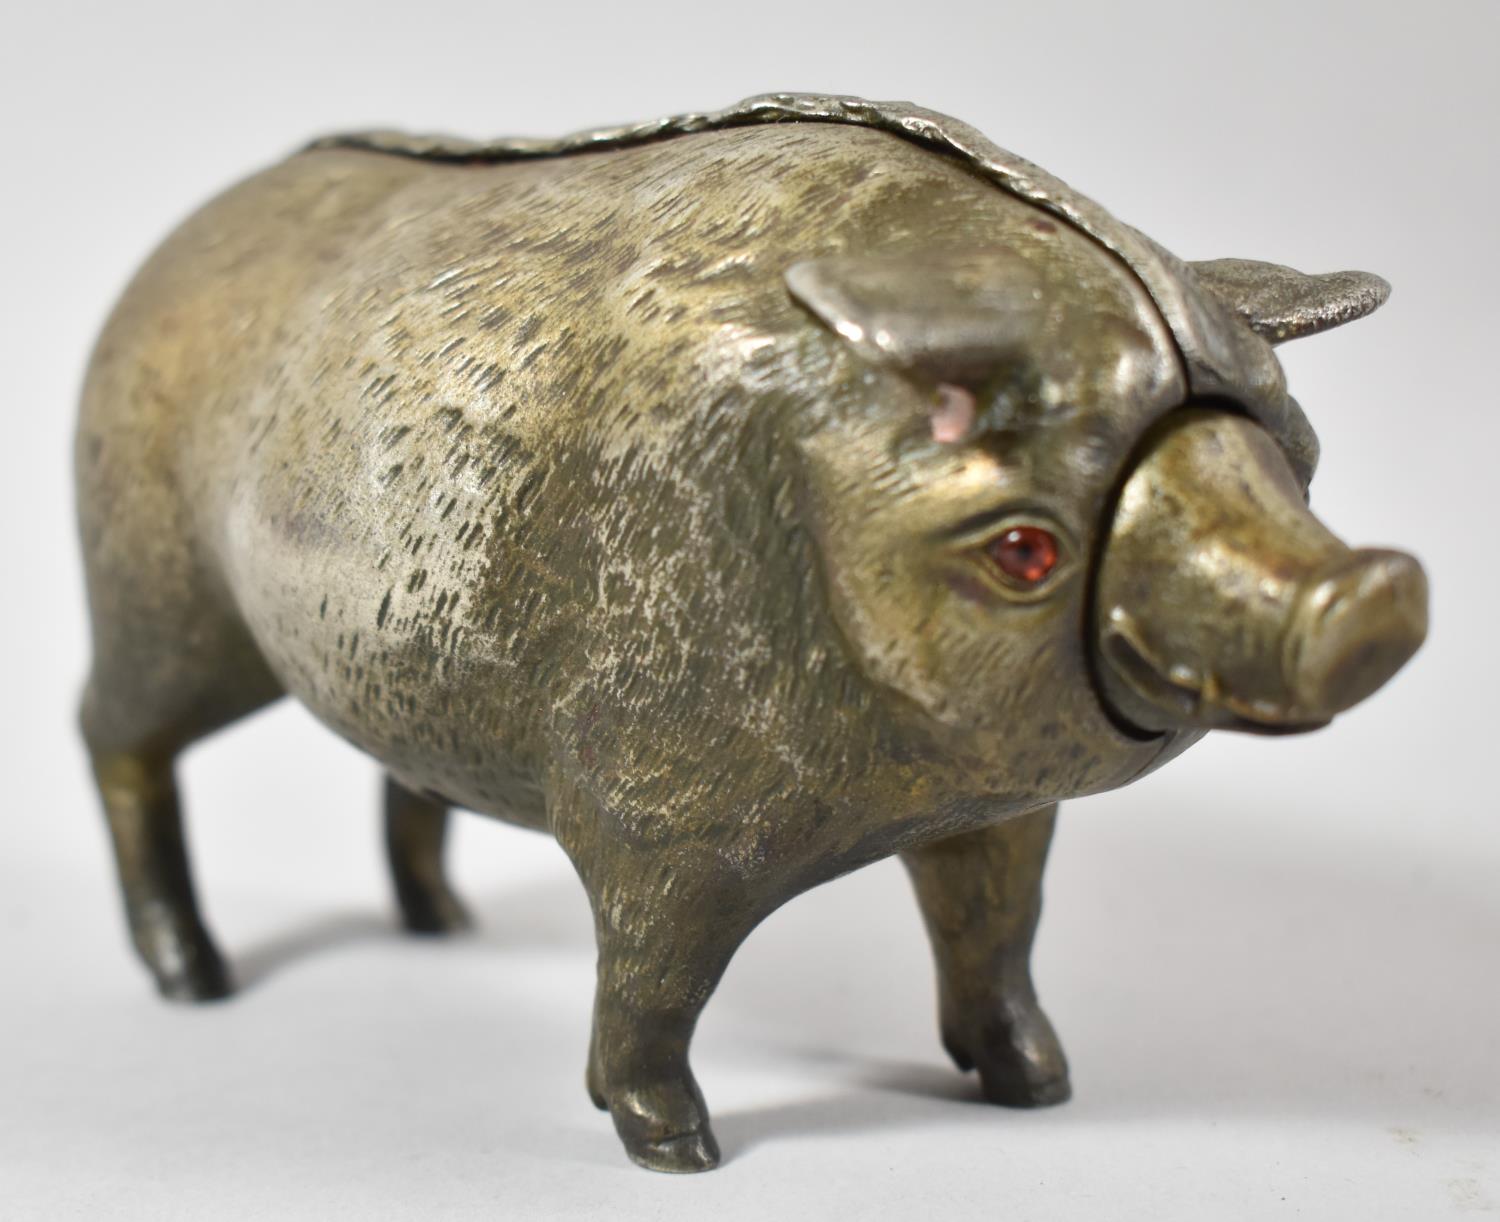 An Edwardian Silver Plated Novelty Table Bell Modelled as a Pig with Hinged Snout, Curly Tail and